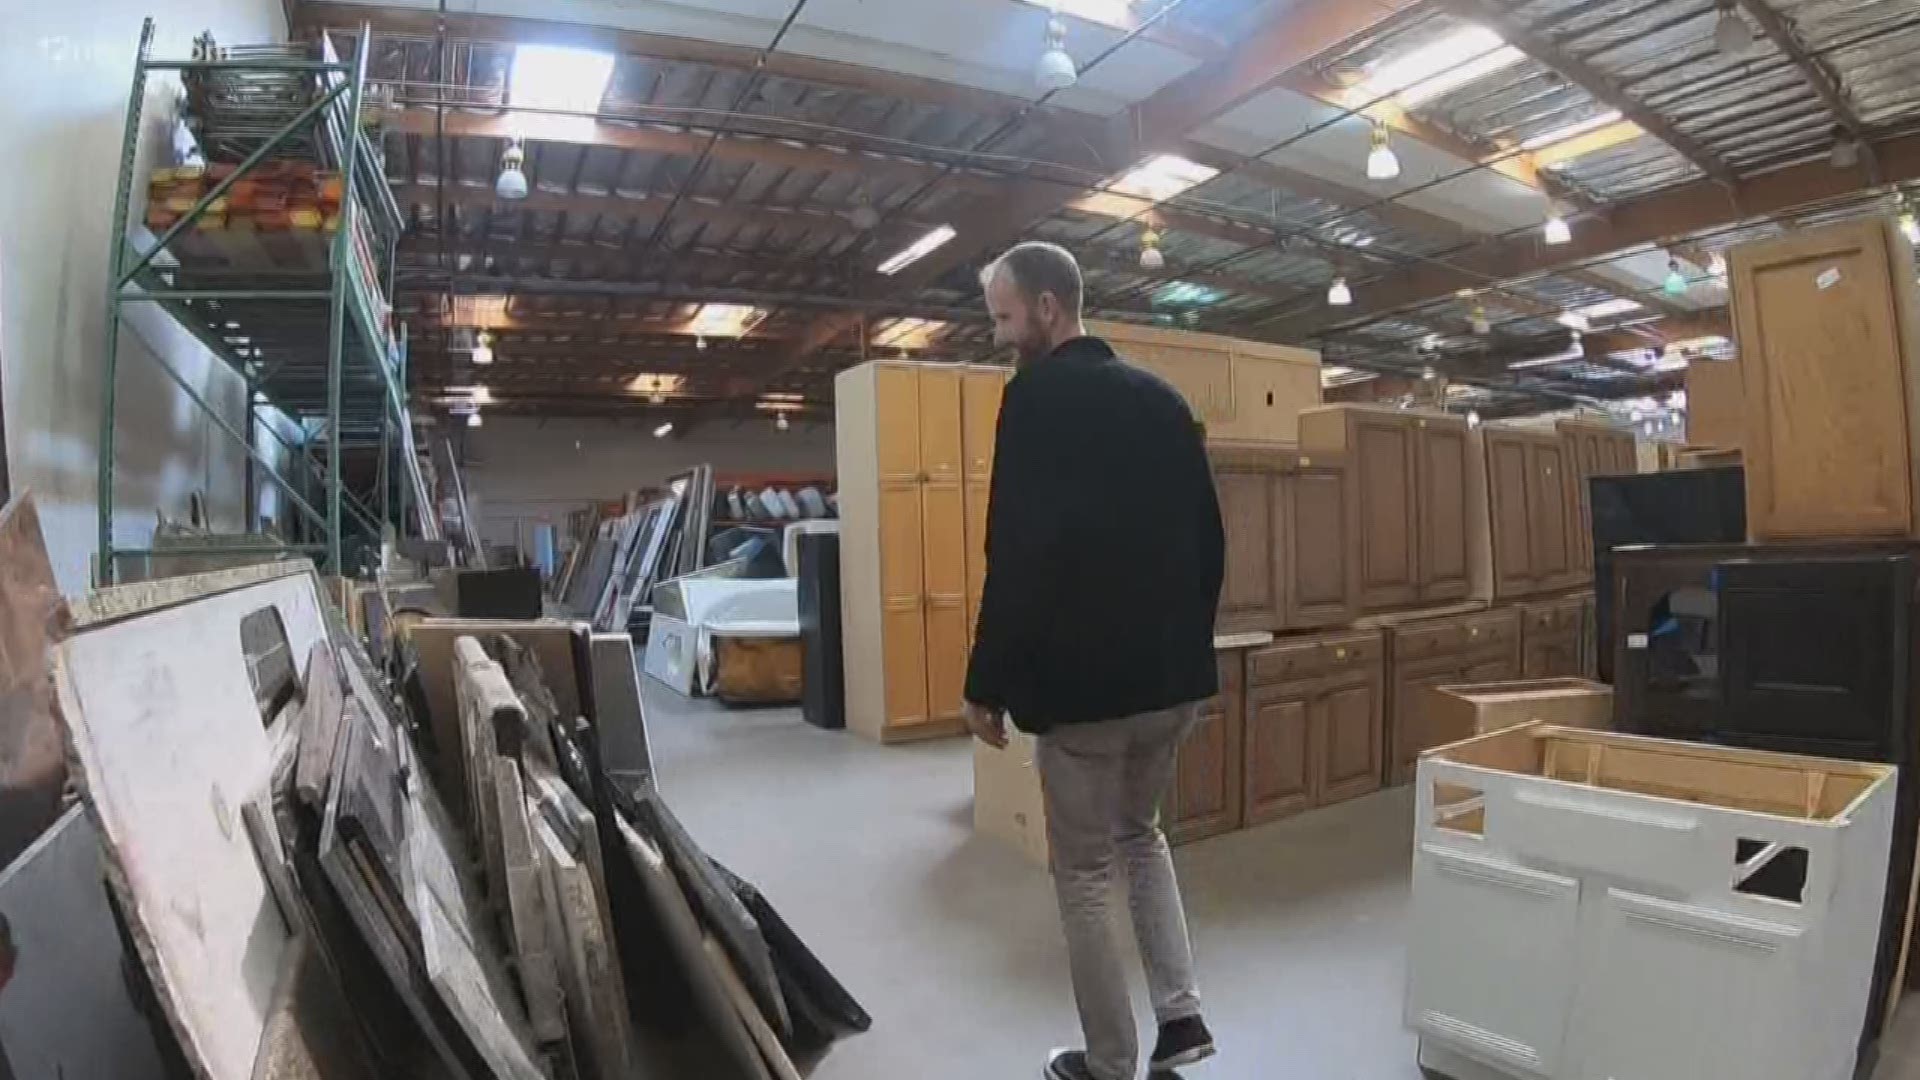 Remodeling a home can cost thousands and create a ton of unnecessary waste. But, a Valley nonprofit is making it possible to save some serious cash and recycle most of the unwanted housing items that come along with renovations.